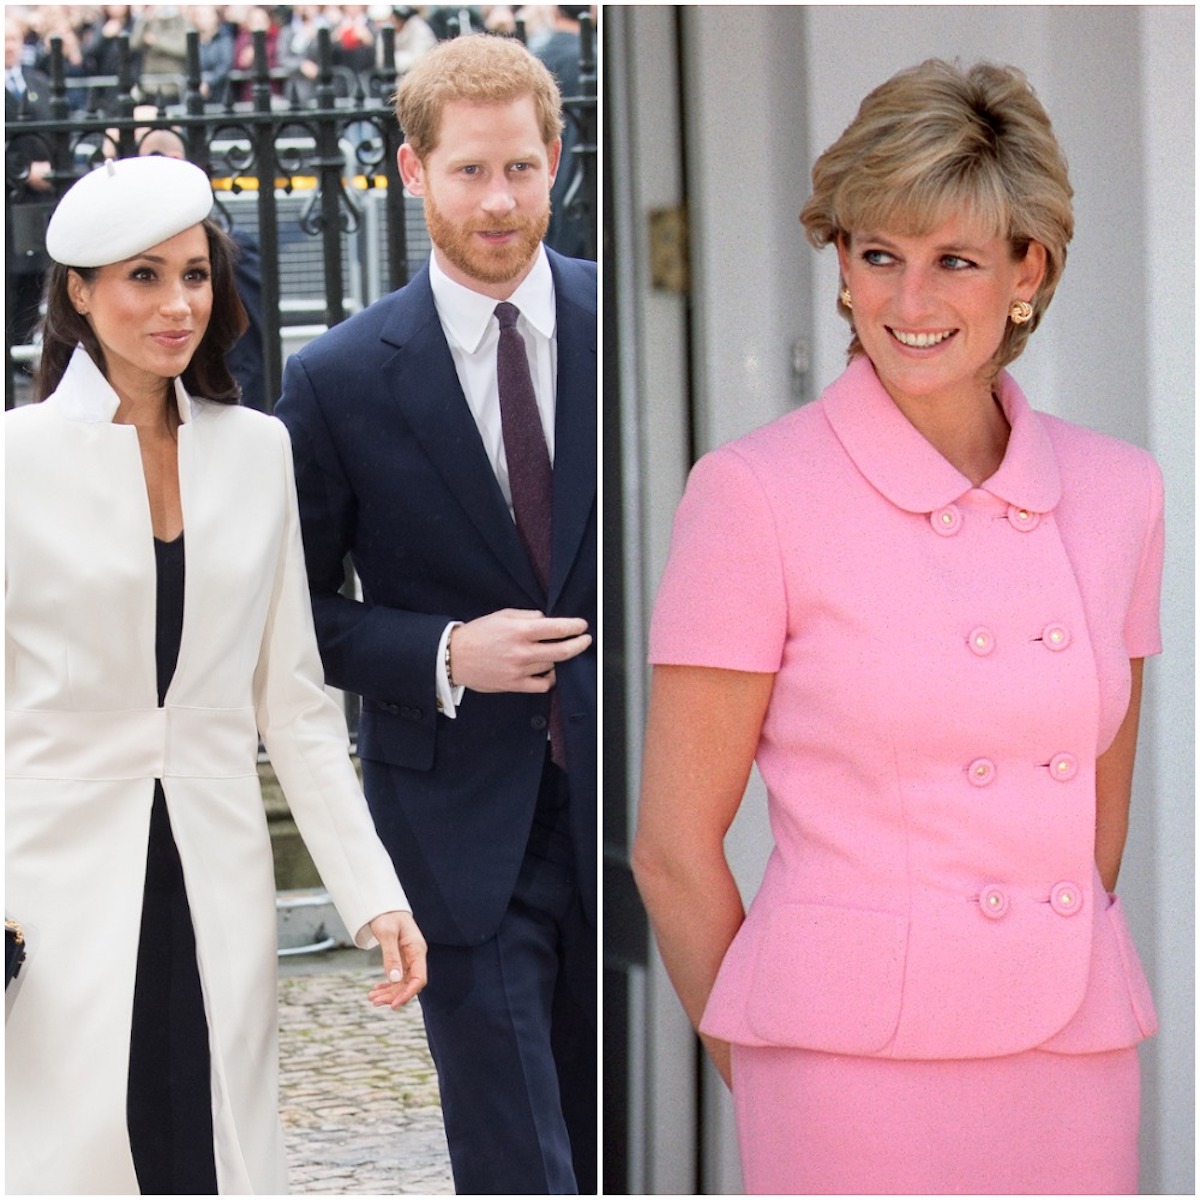 (L-R) Meghan Markle and Prince Harry arrive at the 2018 Commonwealth Day service; Princess Diana smiles as she poses for photographers in Argentina